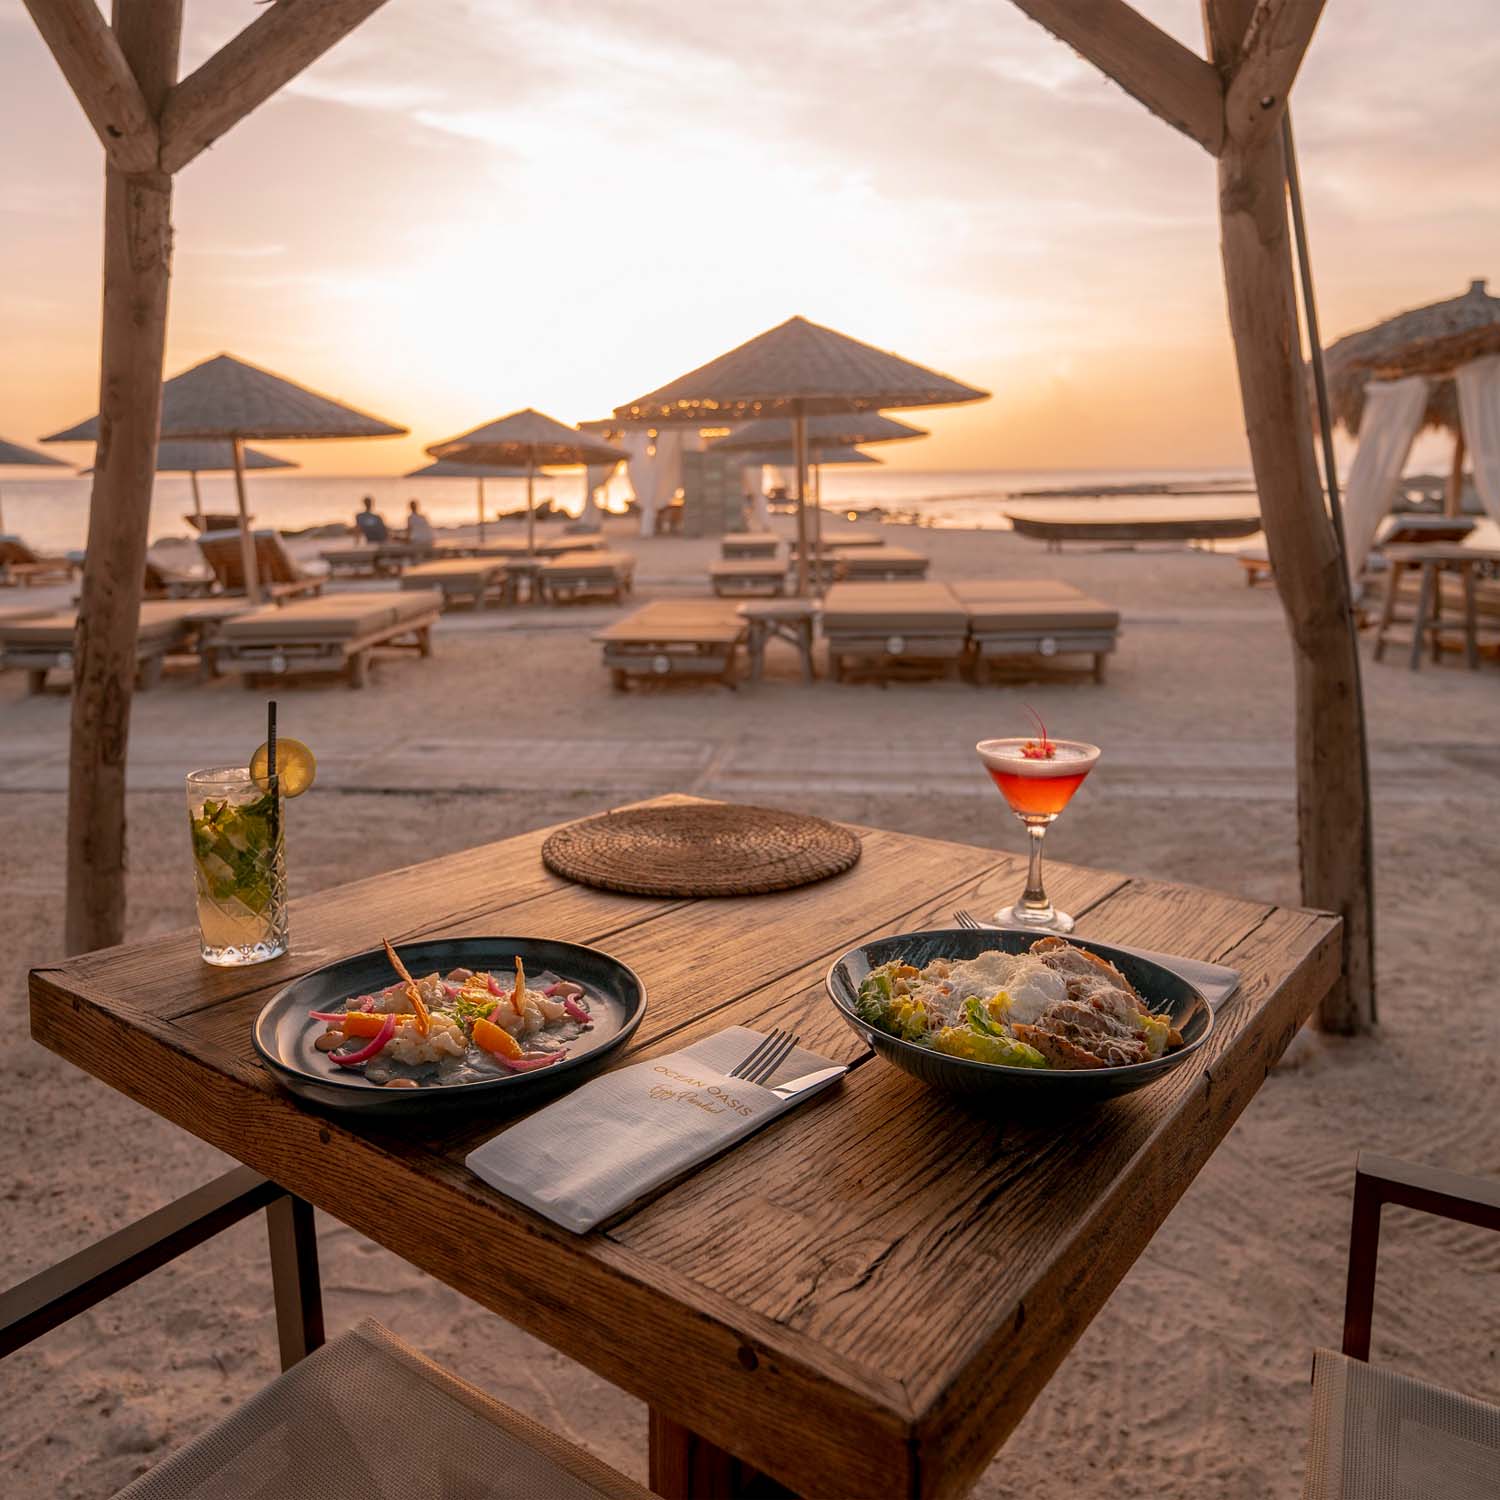 Table set for two on beach at sunset